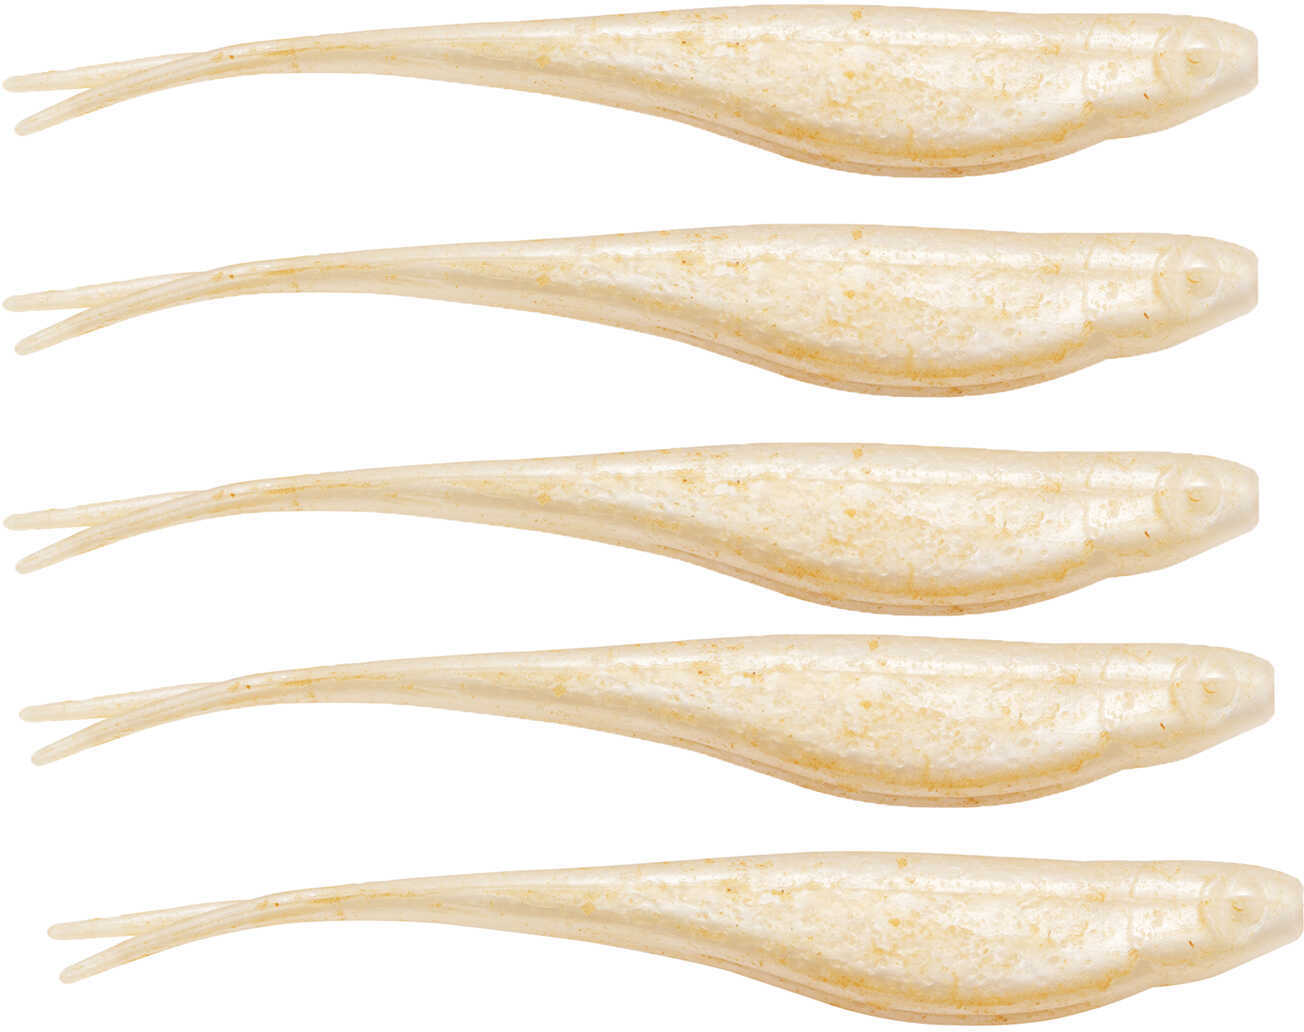 Z-Man / Chatterbait Scented Jerk ShadZ 5-Inch Lure Pearl 5-Pack Md: SJS5-84PK5